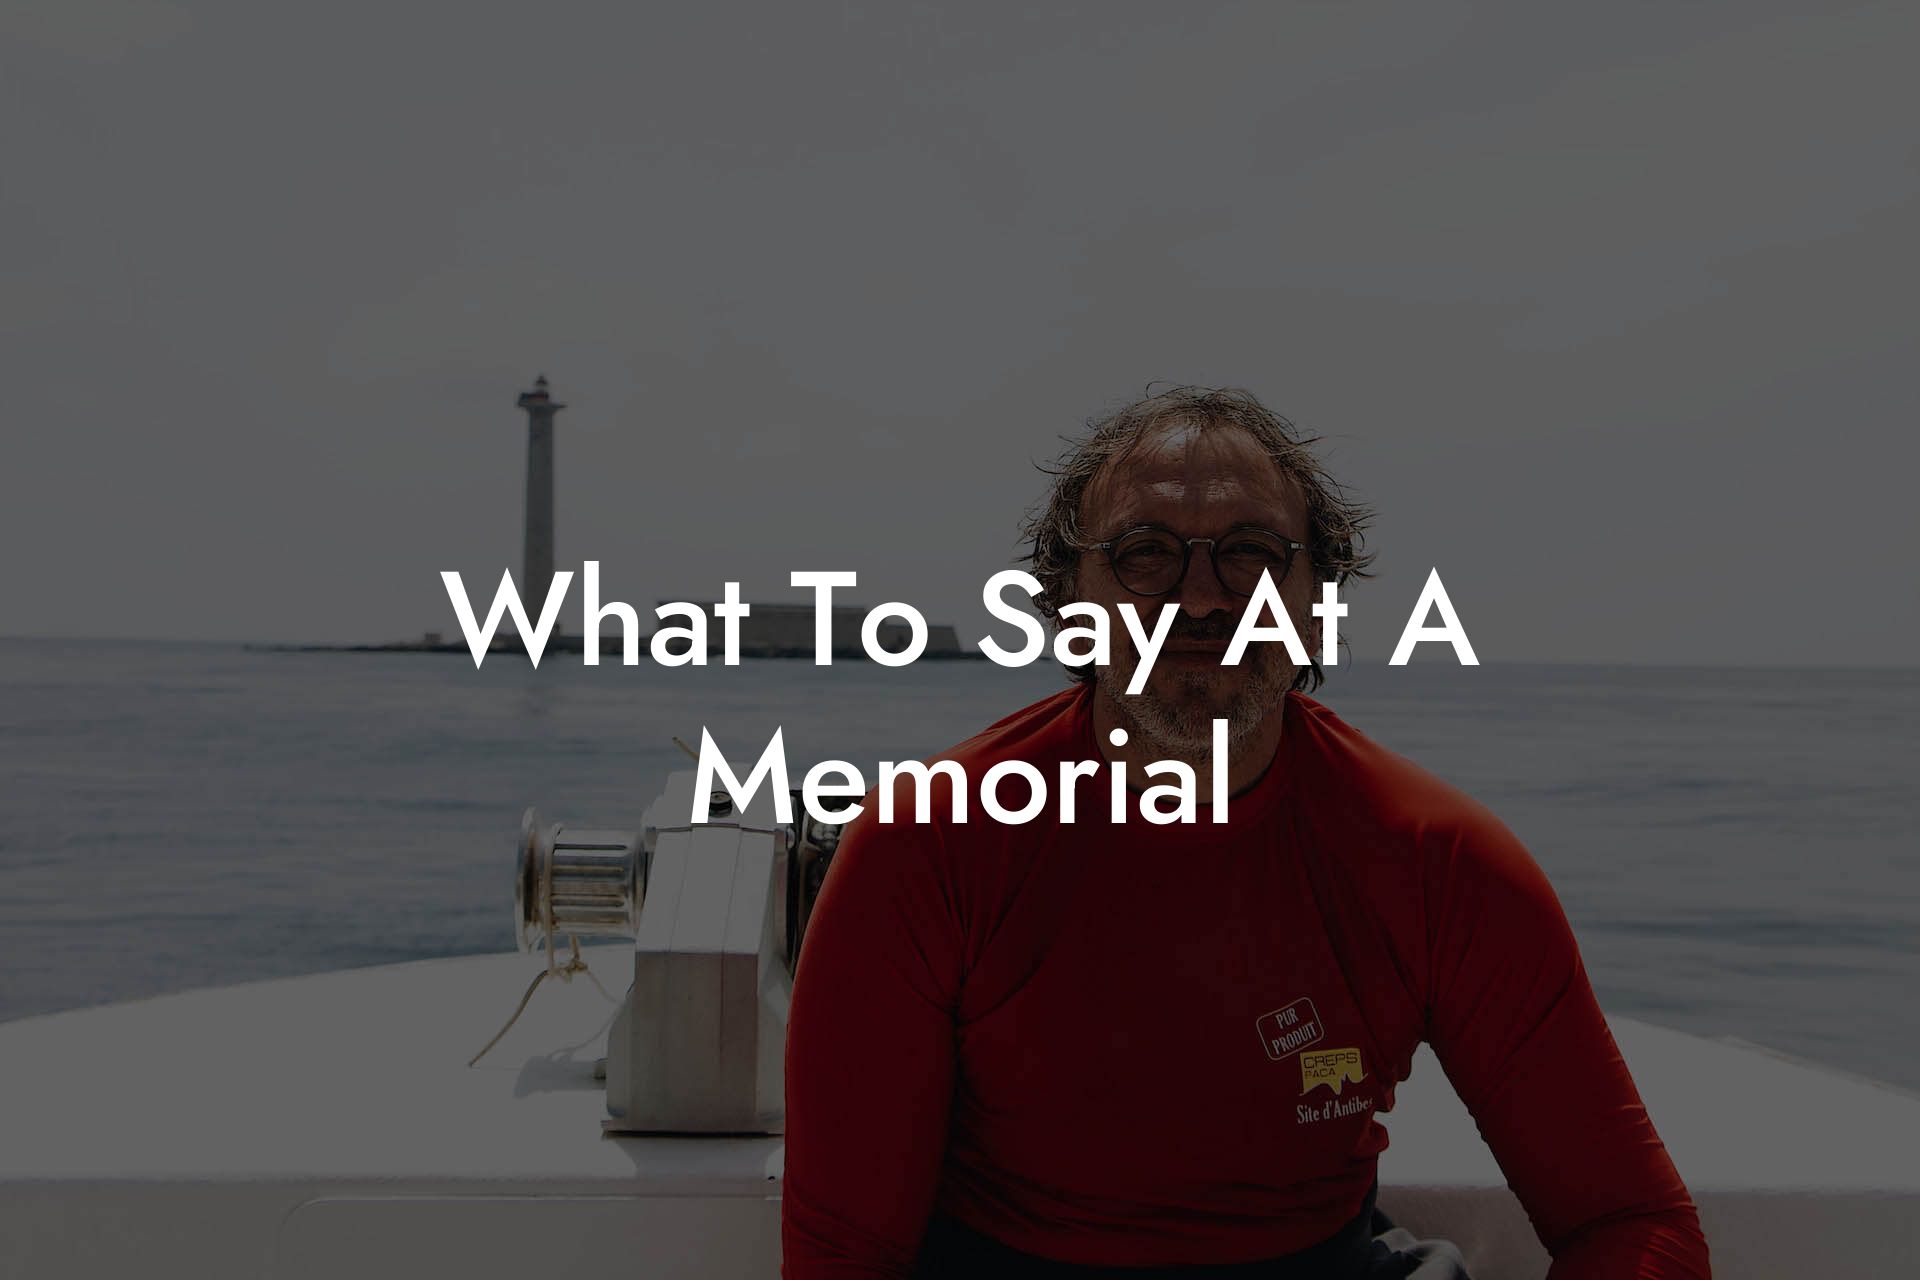 What To Say At A Memorial